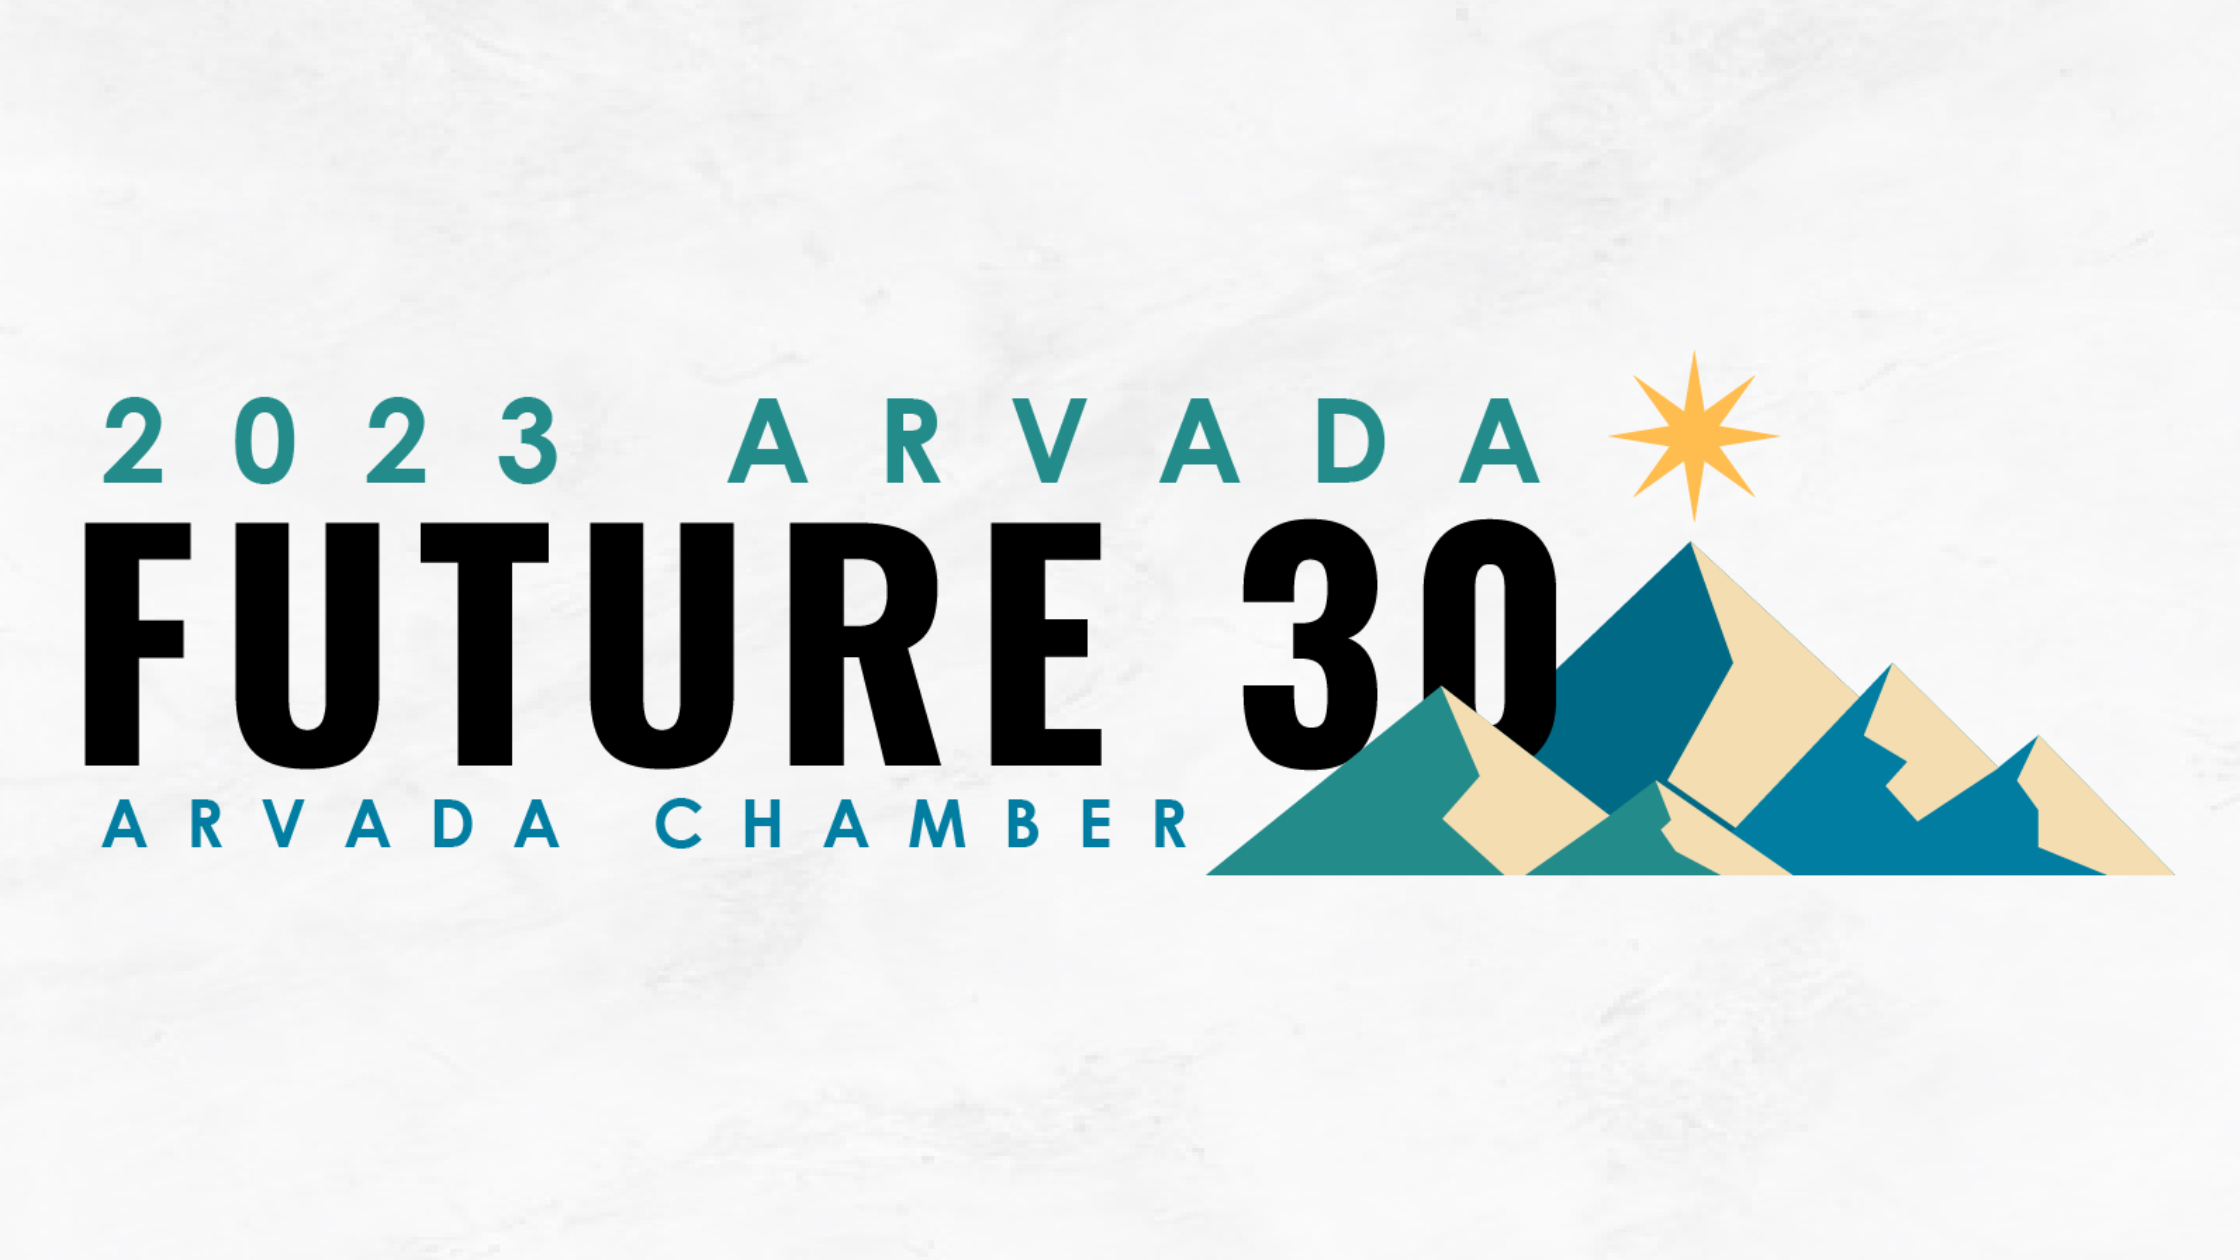 Arvada Chamber Announces Arvada Future 30 Campaign to Recognize Outstanding Young Professionals